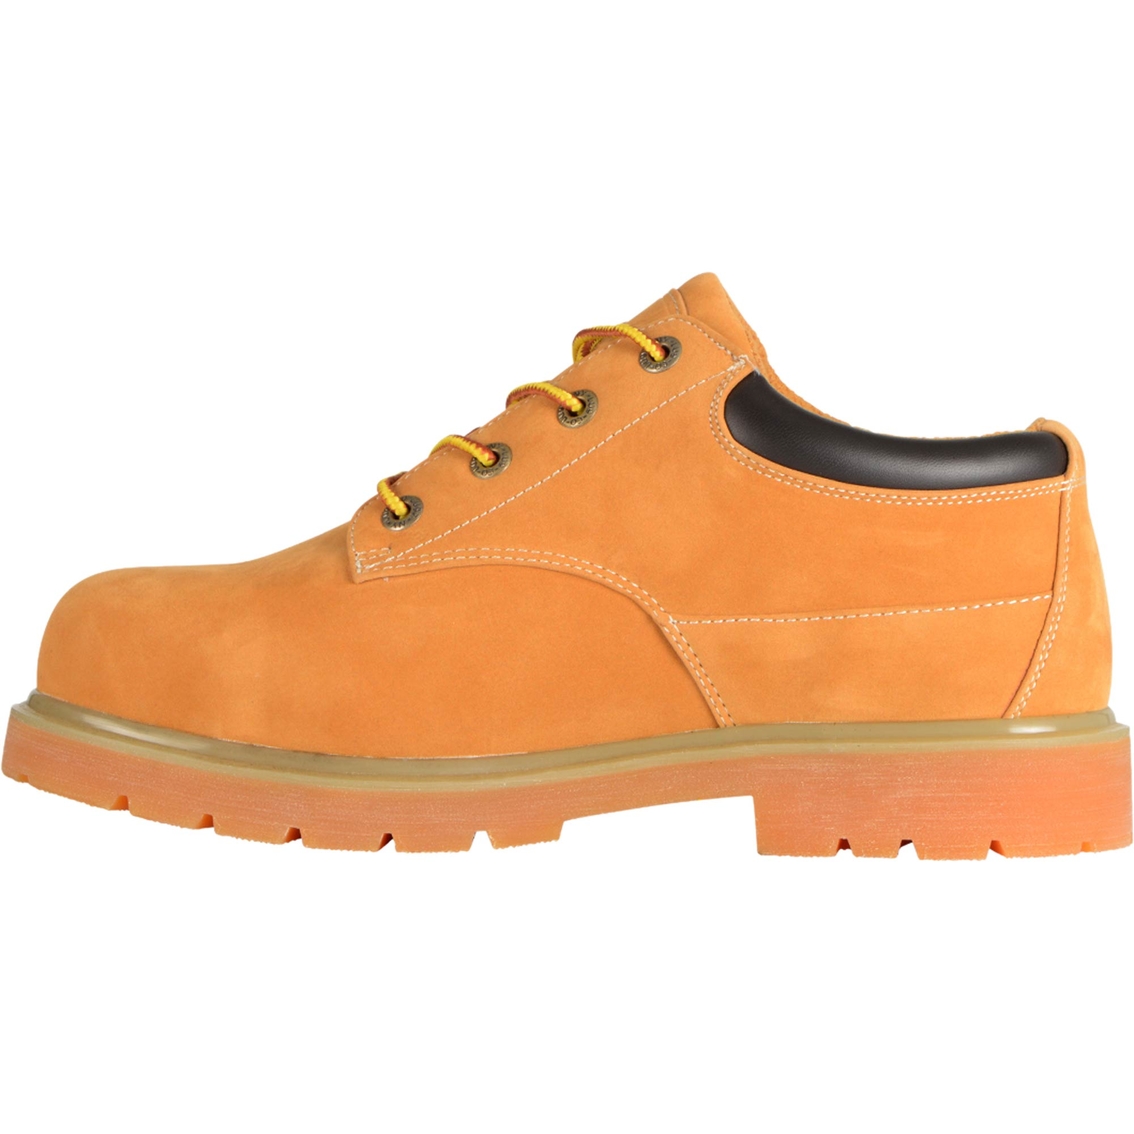 Lugz Men's Drifter Lo ST Boots - Image 2 of 4